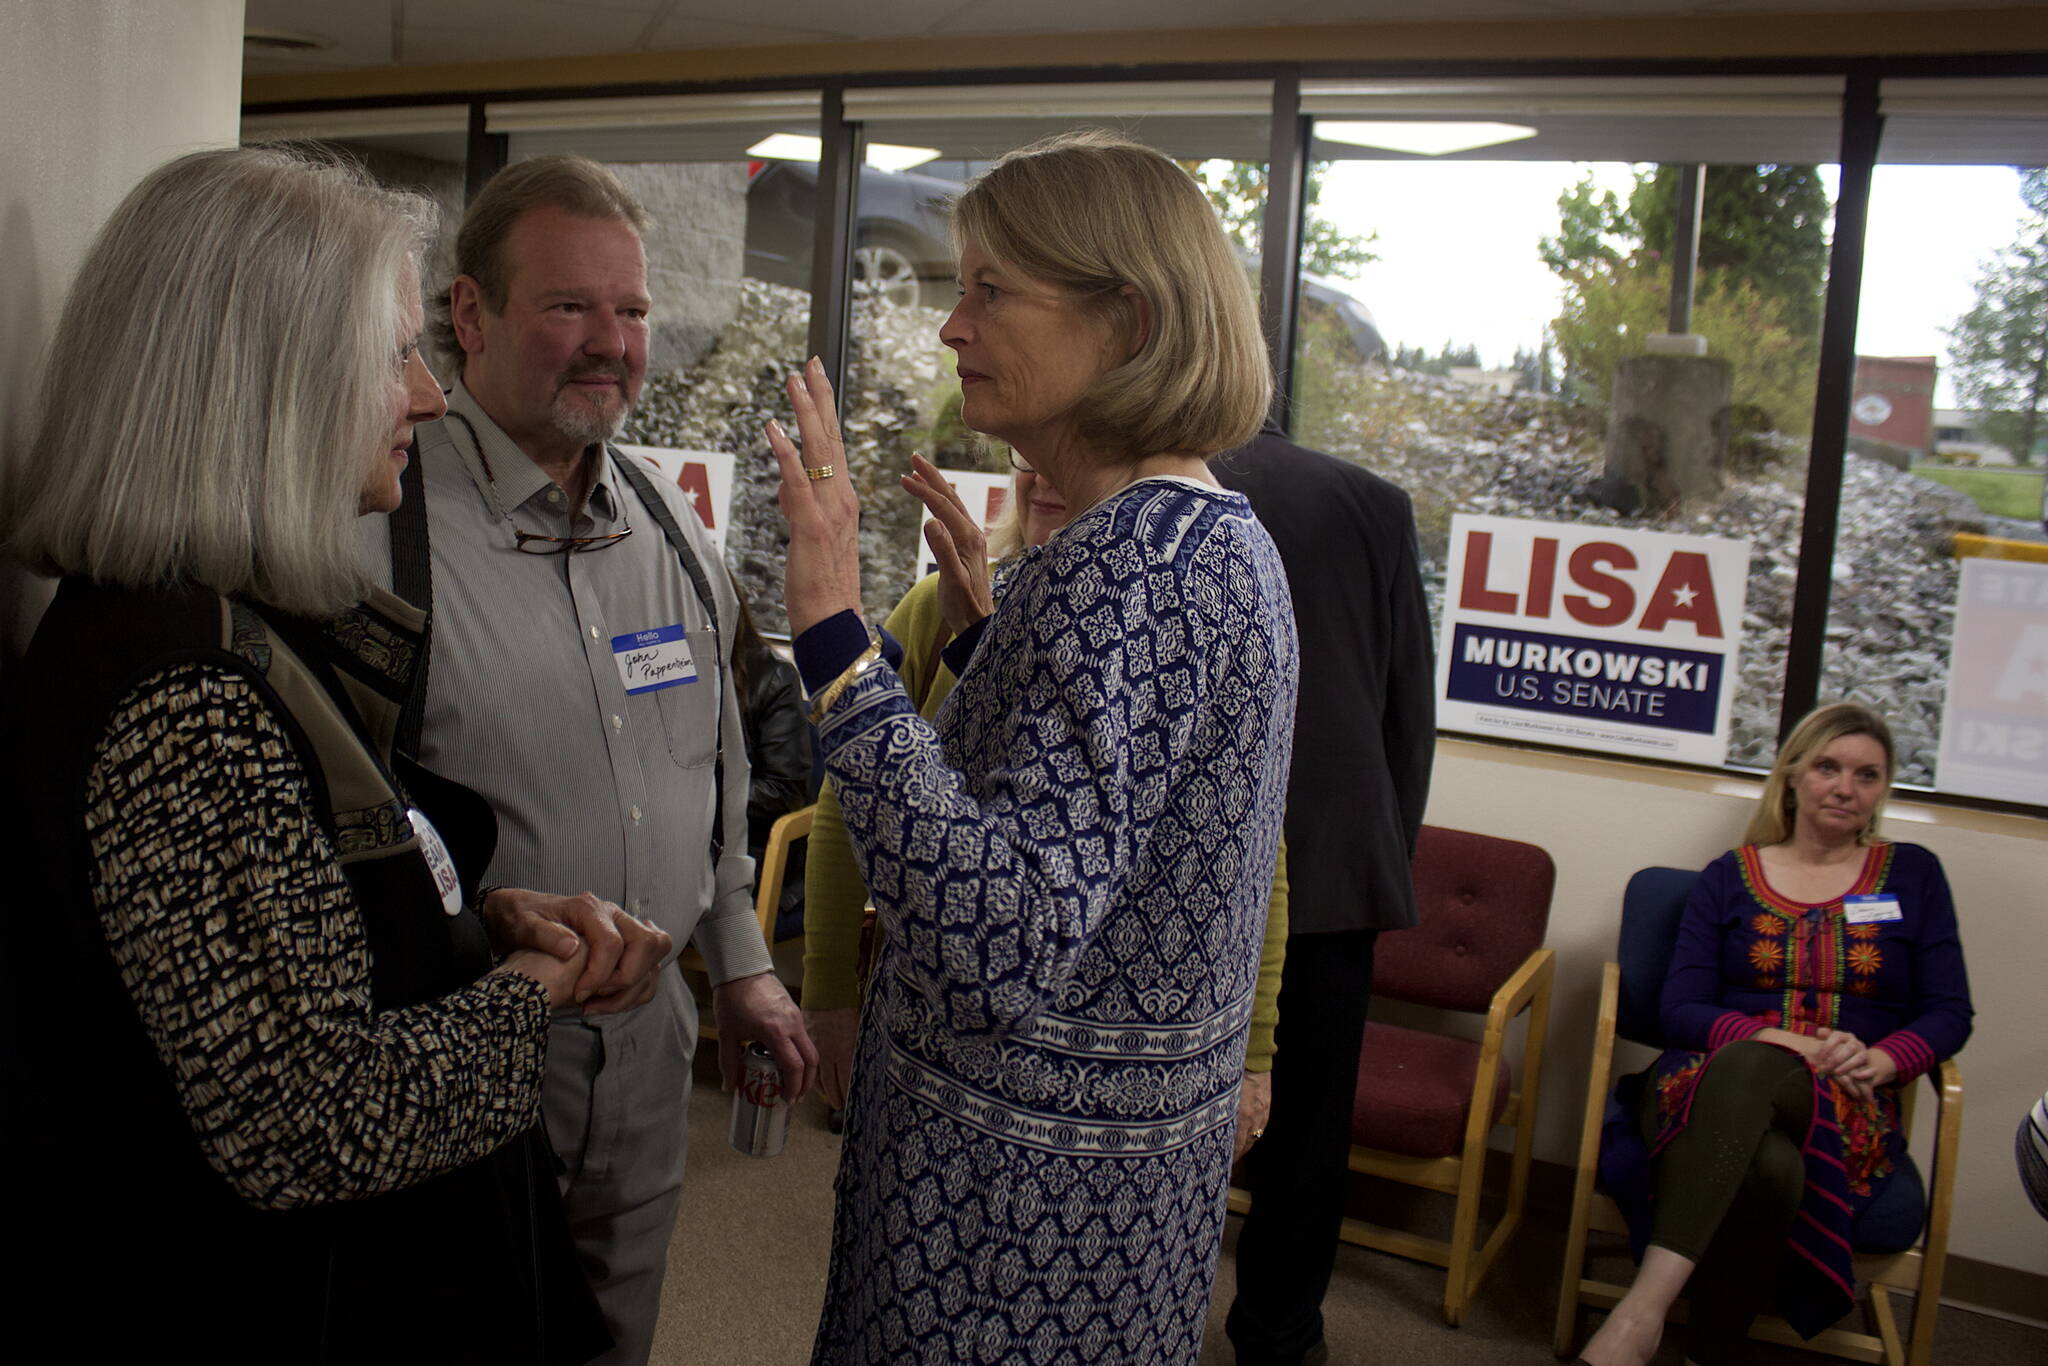 Supporters of U.S. Sen. Lisa Murkowski wait for an opportunity to talk to her at her newly Juneau campaign headquarters Thursday evening at Kootznoowoo Plaza. (Mark Sabbatini / Juneau Empire)